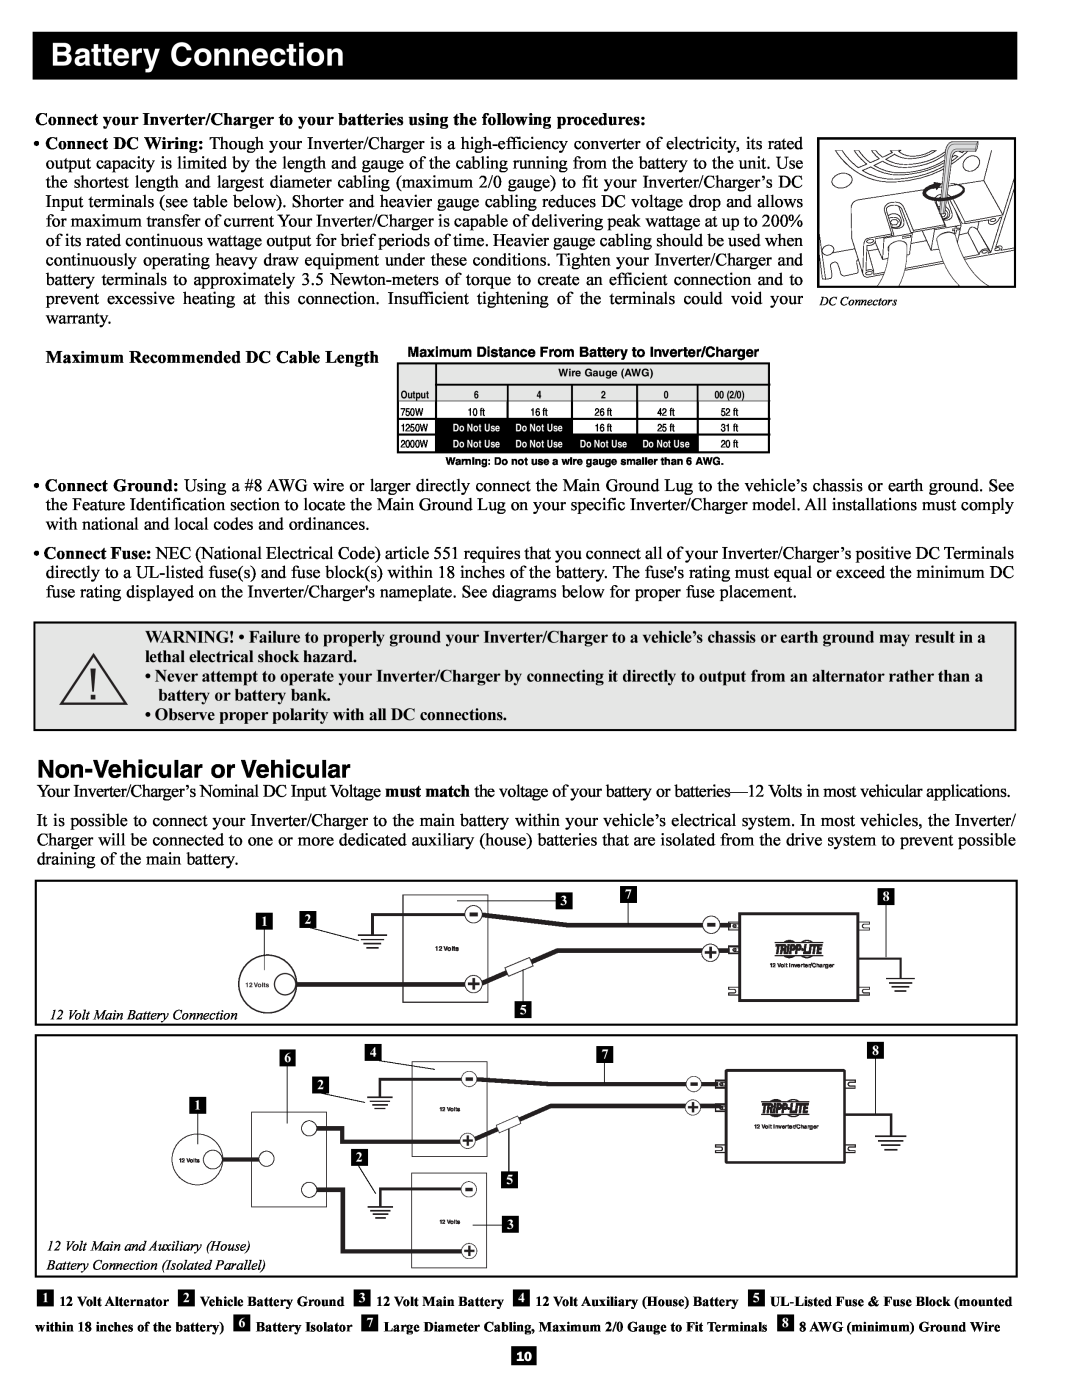 Tripp Lite APSRM4 owner manual Battery Connection, Non-Vehicular or Vehicular 